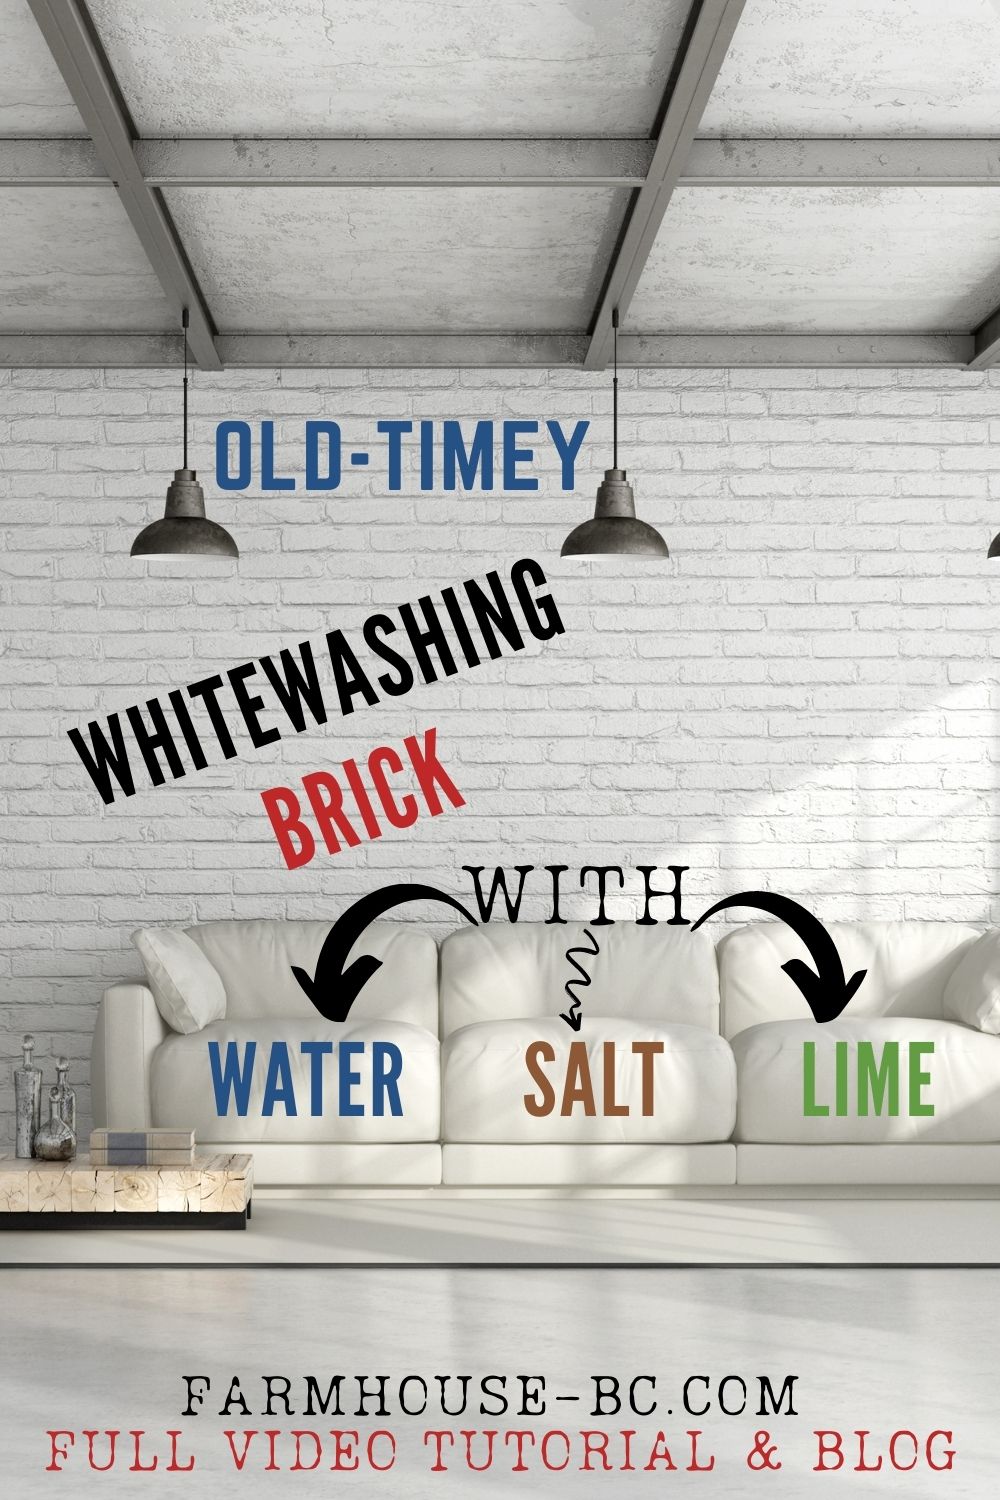 Using lime to whitewash brick for a New York loft style